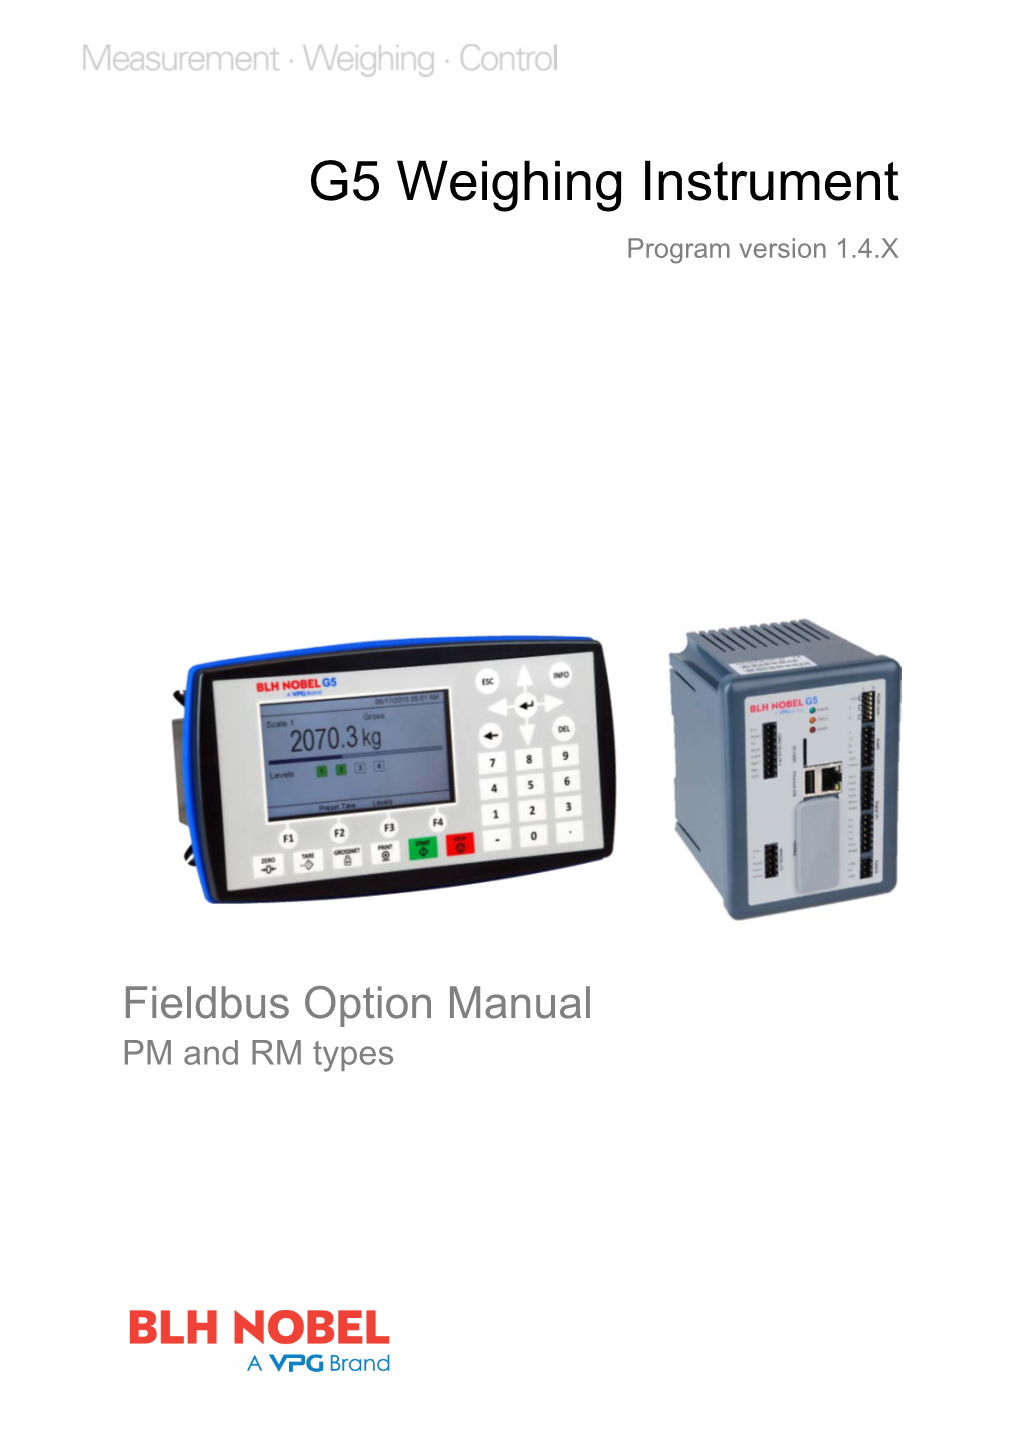 G5 Weighing Instrument. Fieldbus Option Manual